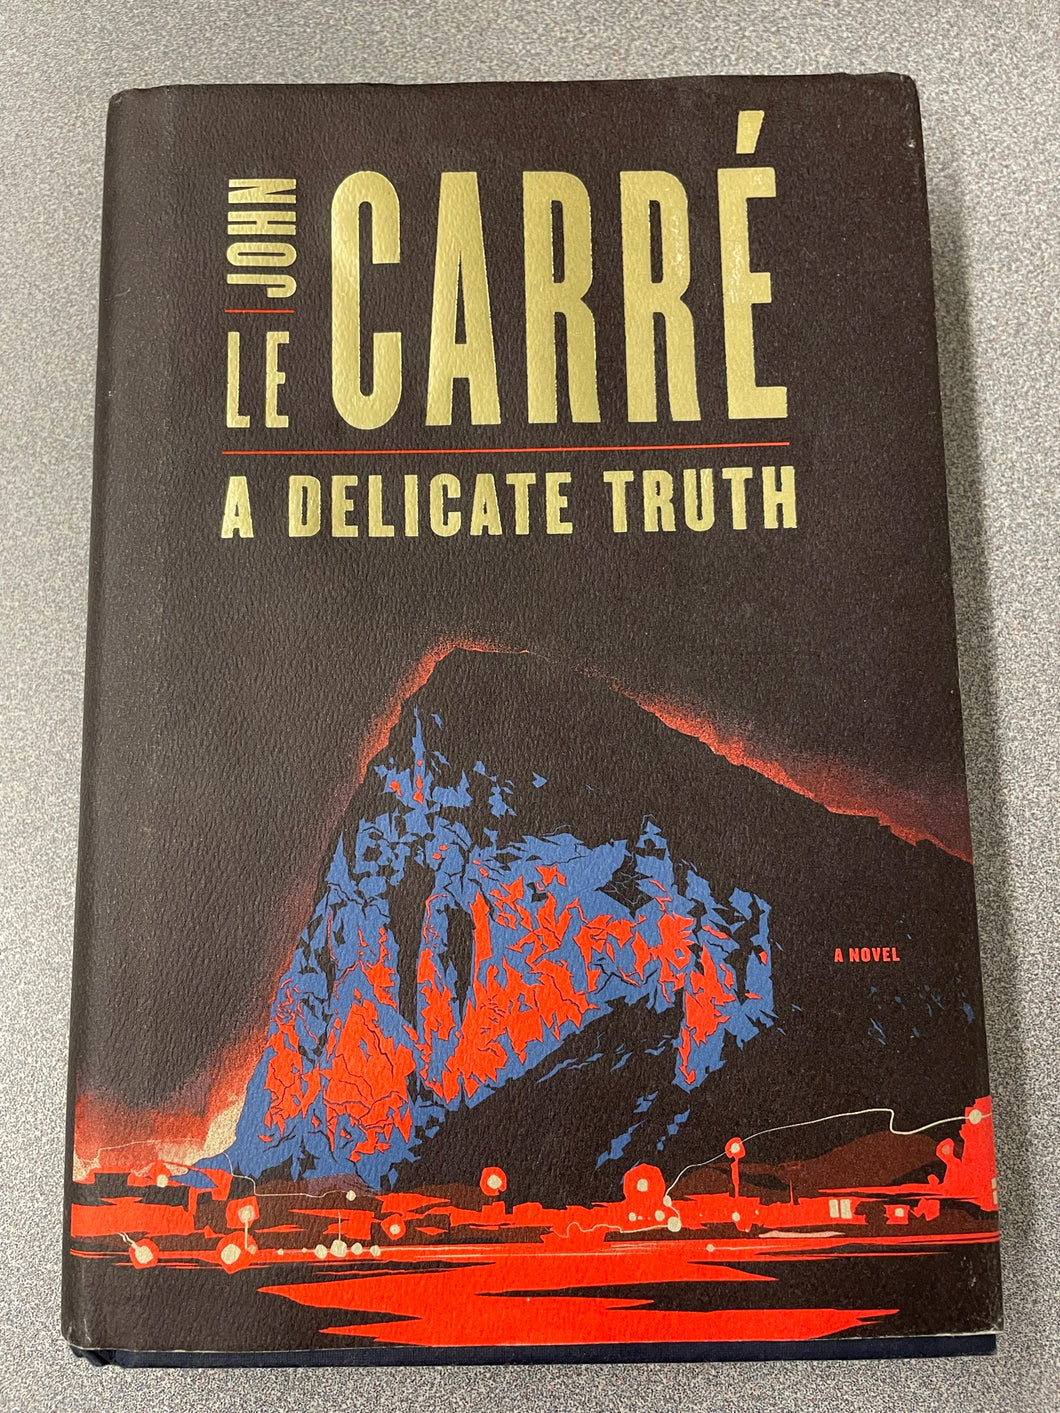 Le Carre, A Delicate Truth [2013] MY 7/23